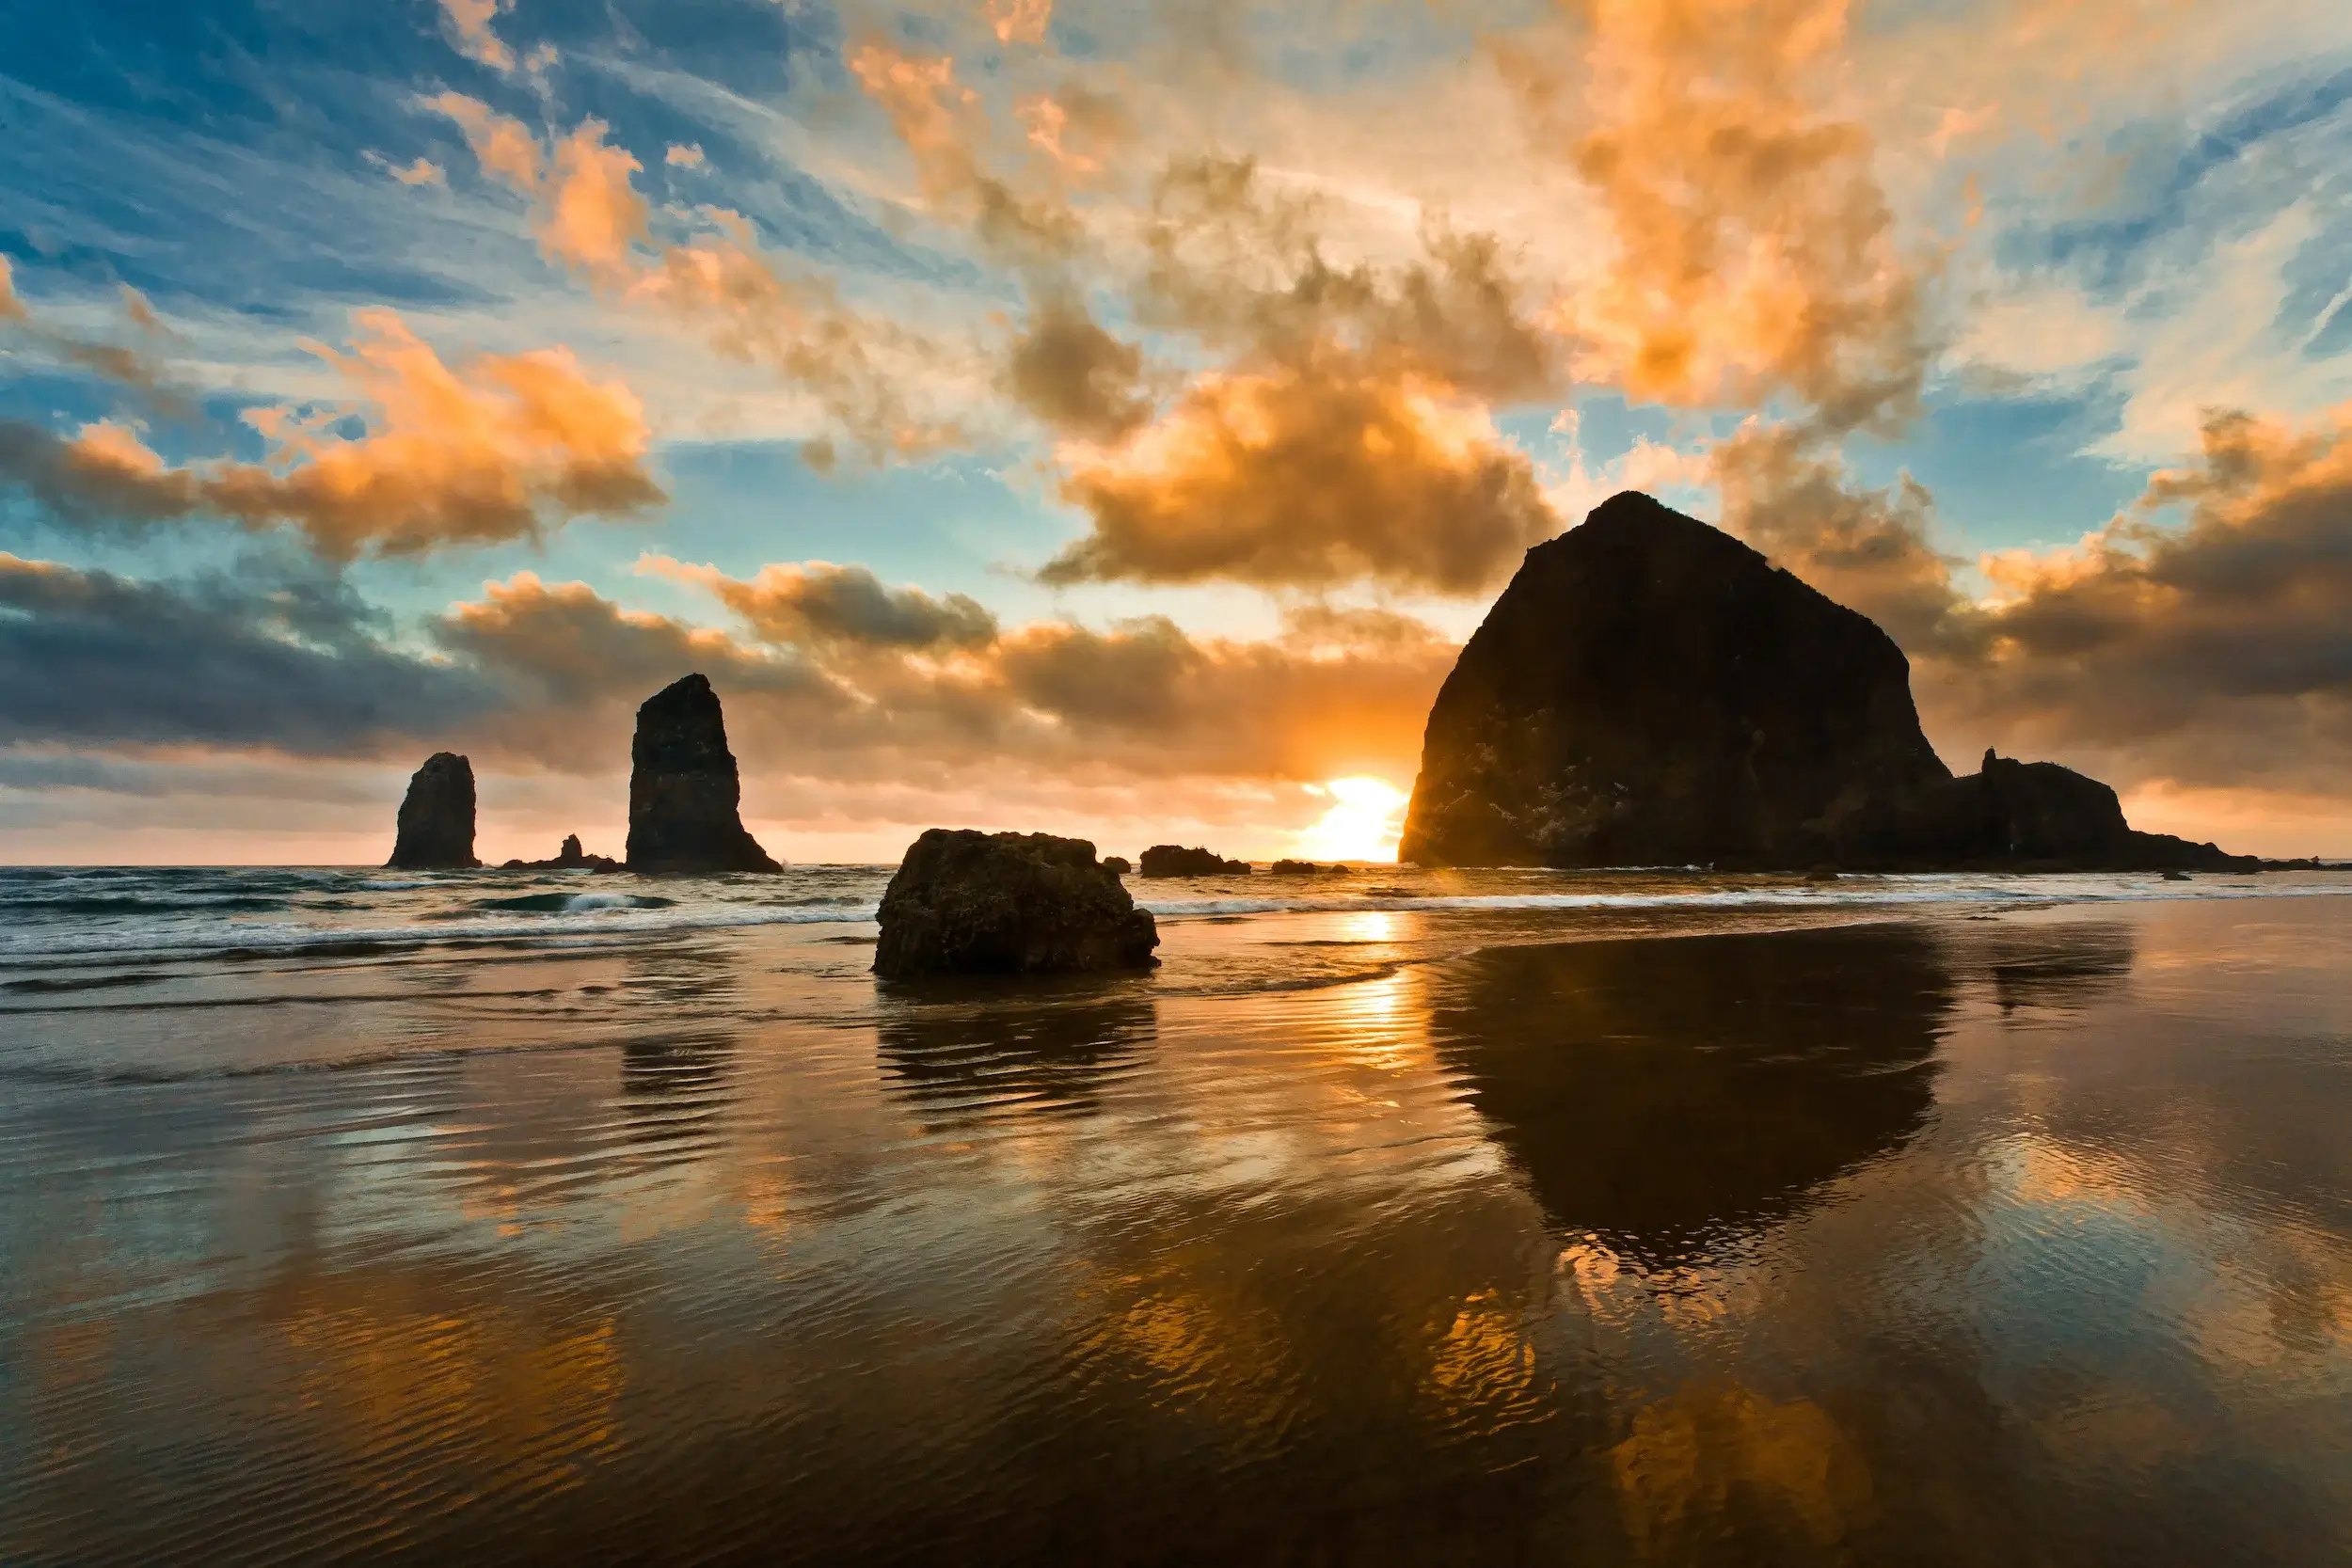 Haystack Rock at sunset Cannon Beach Oregon